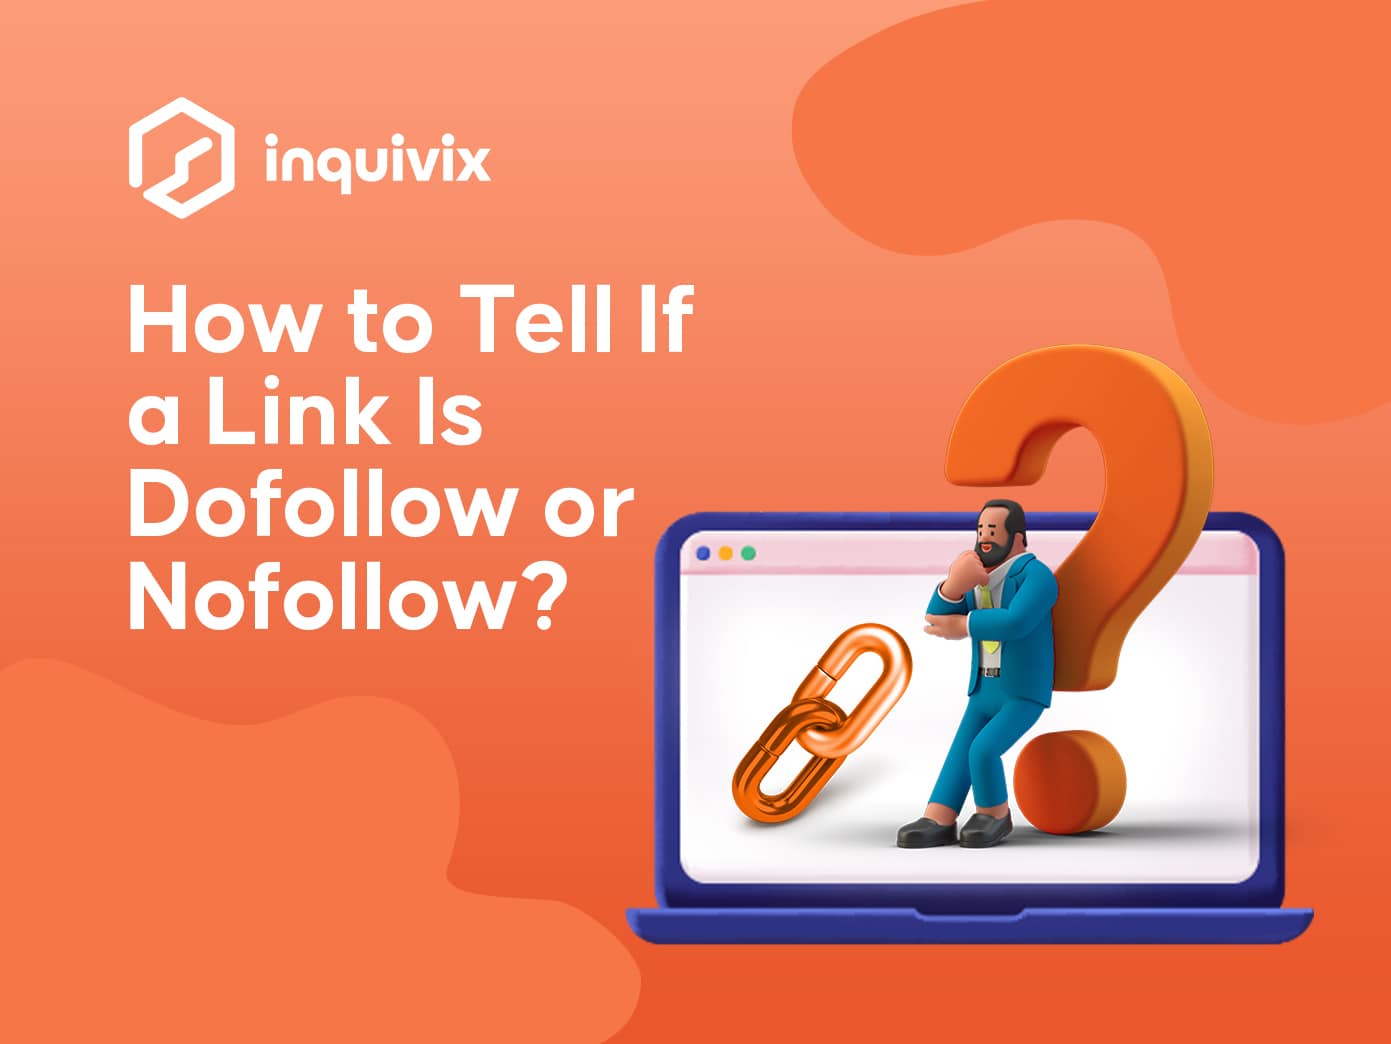 How To Tell If A Link Is Dofollow Or Nofollow?